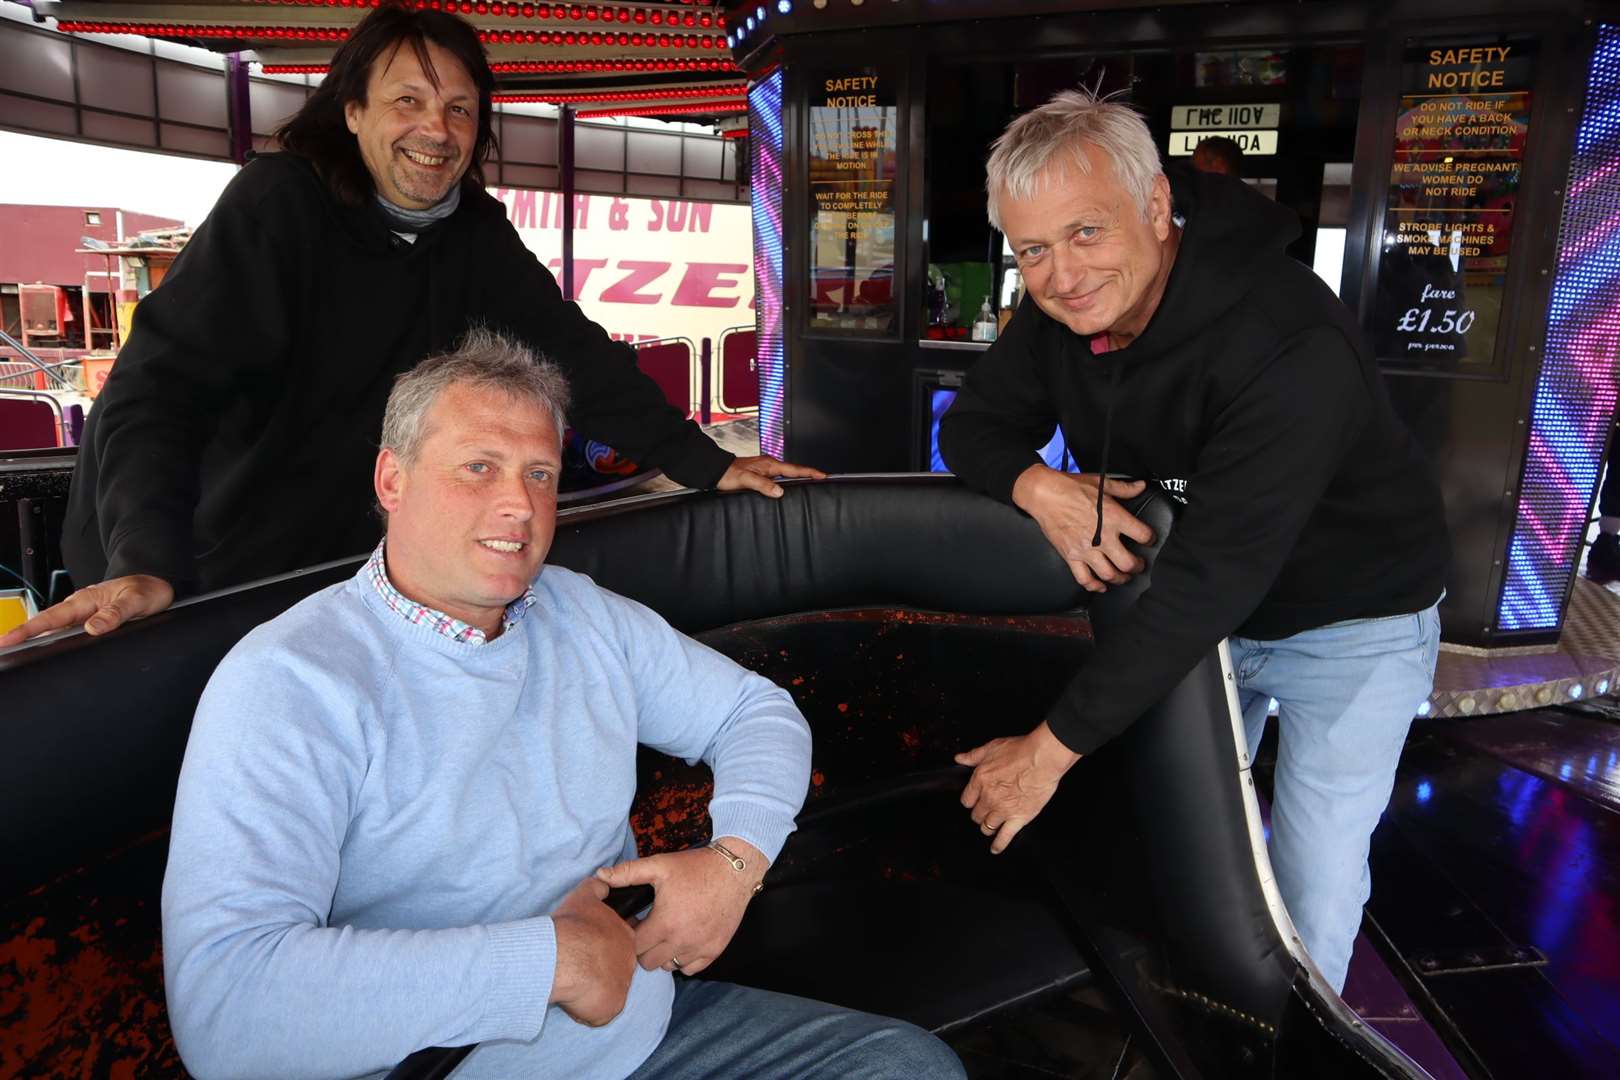 Cllrs Mike Baldock, left, and Richard Palmer give funfair boss Carlos Christian a hand on the waltzer at Smith's funfair at Barton's Point, Sheerness. Picture: John Nurden